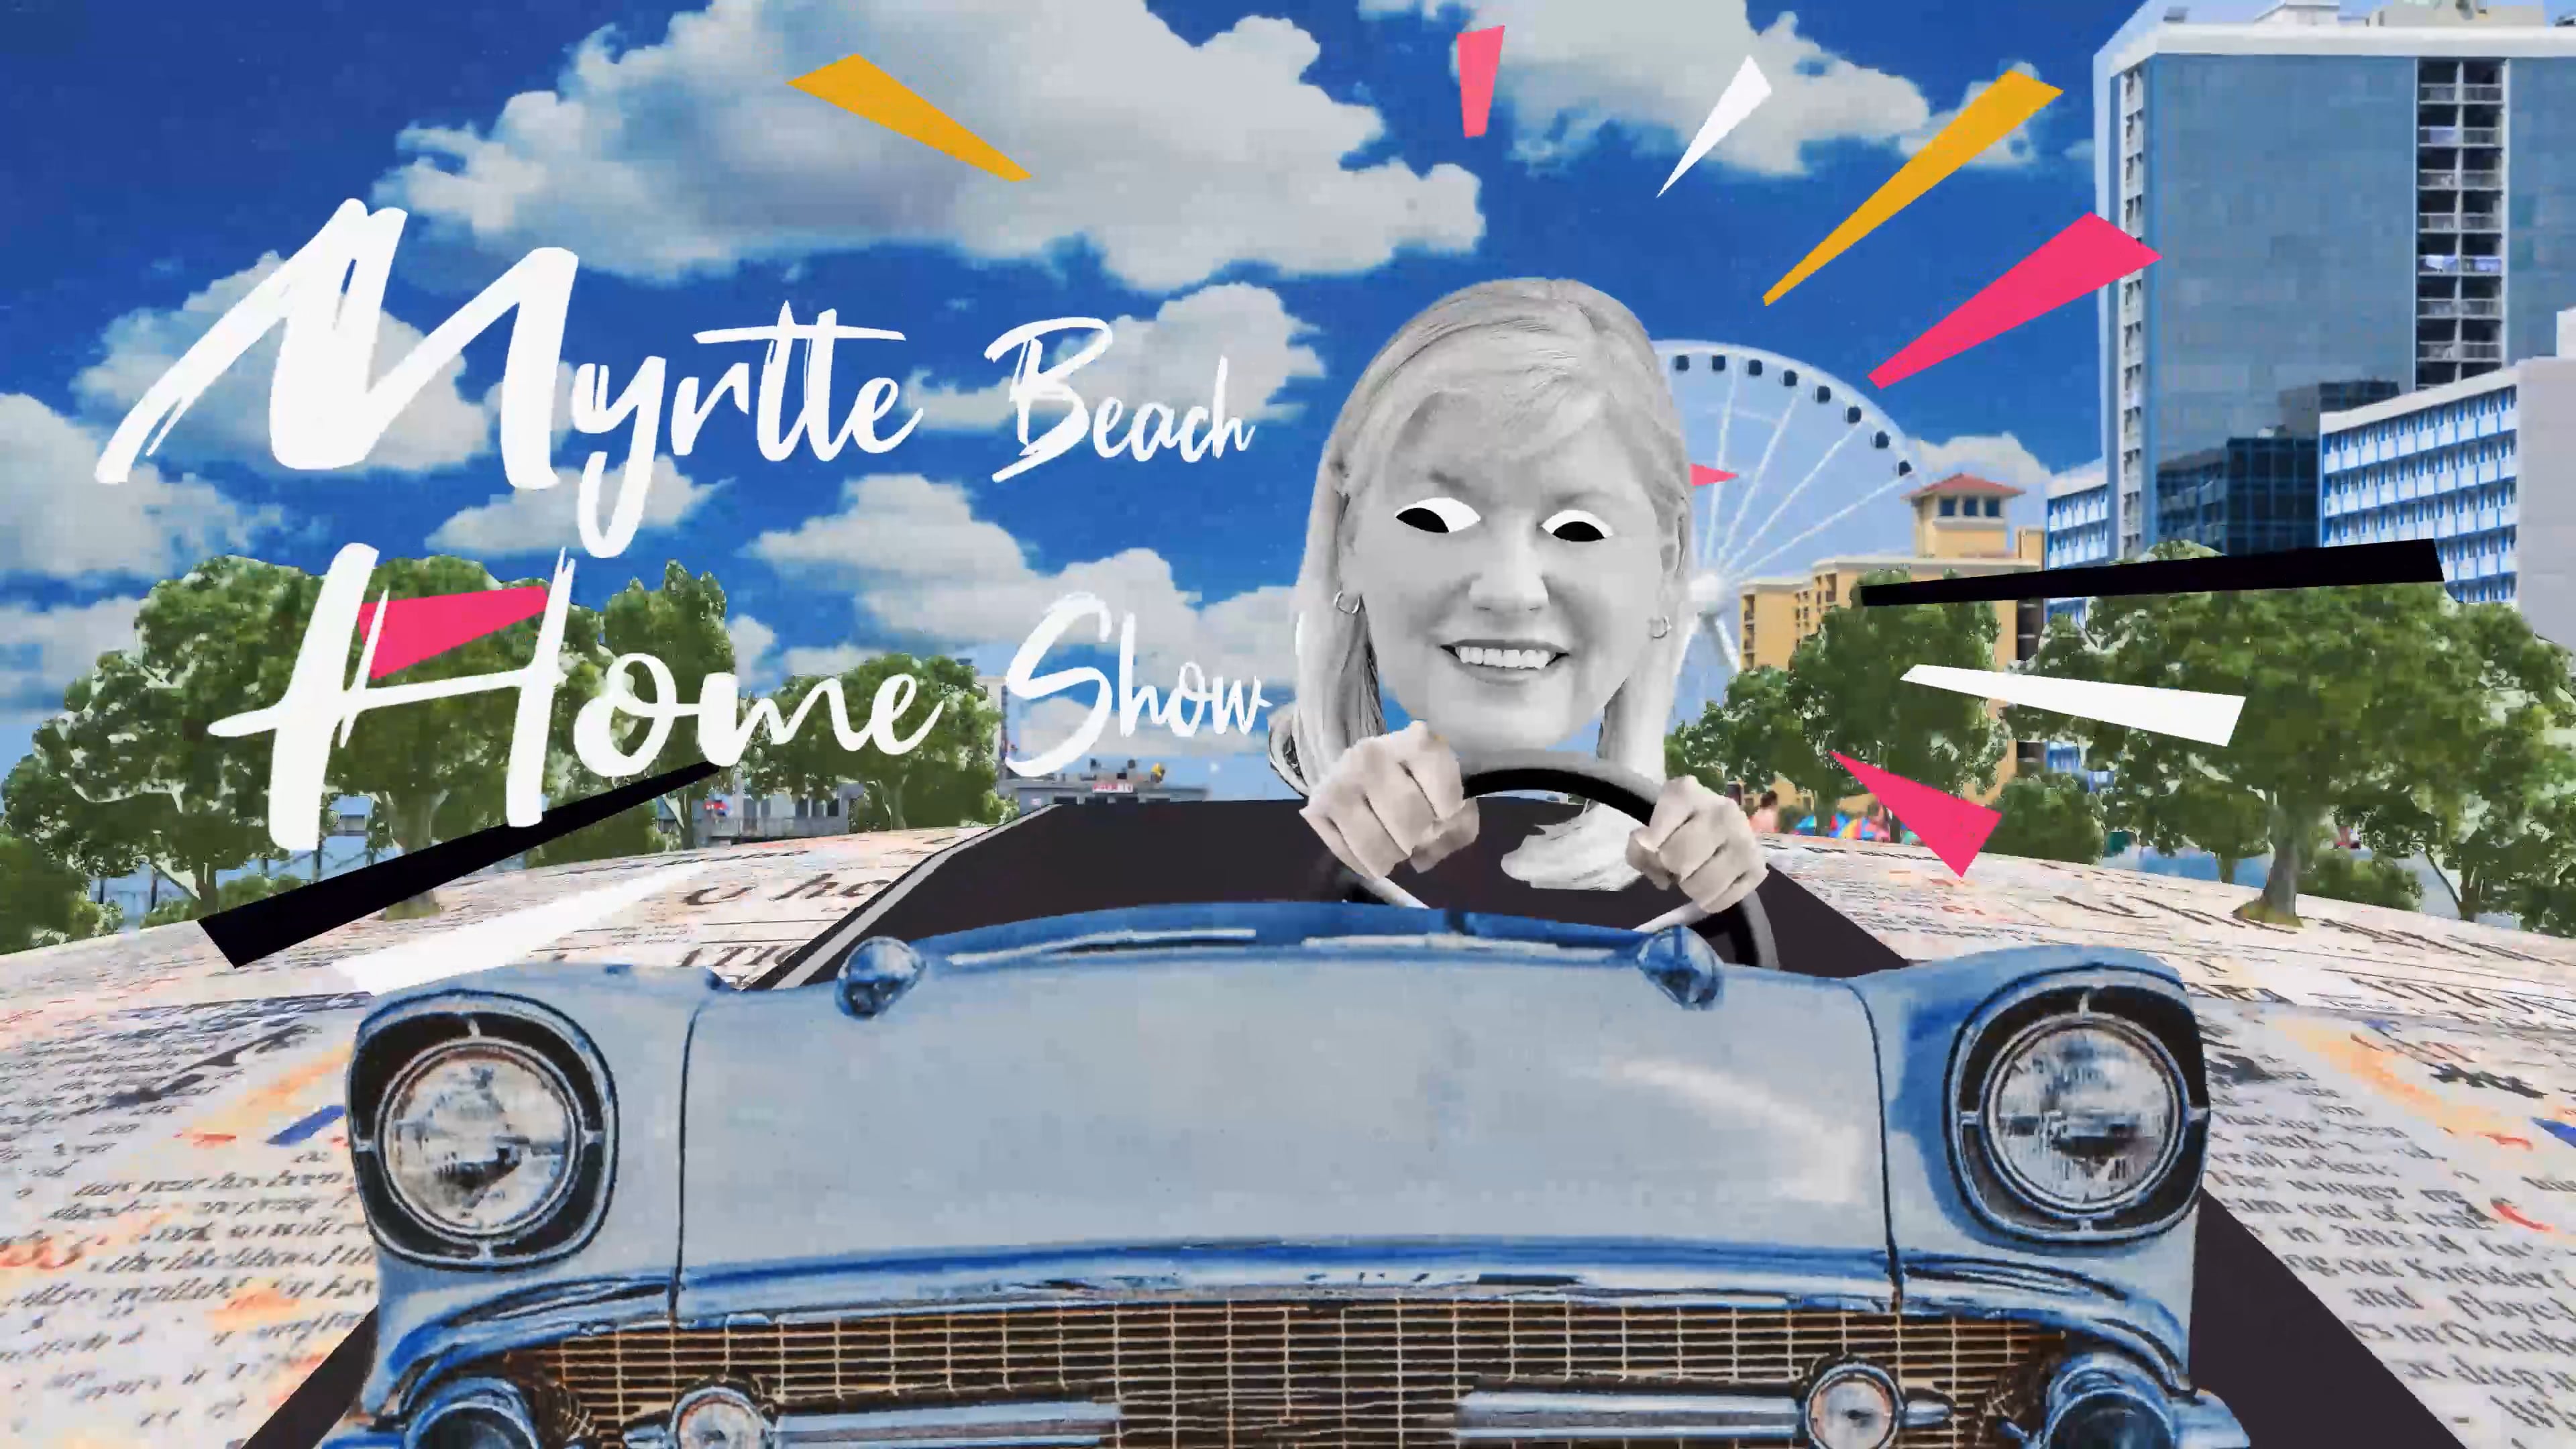 Myrtle Beach Home Show with Cyndi Cobb Coming Soon! on Vimeo